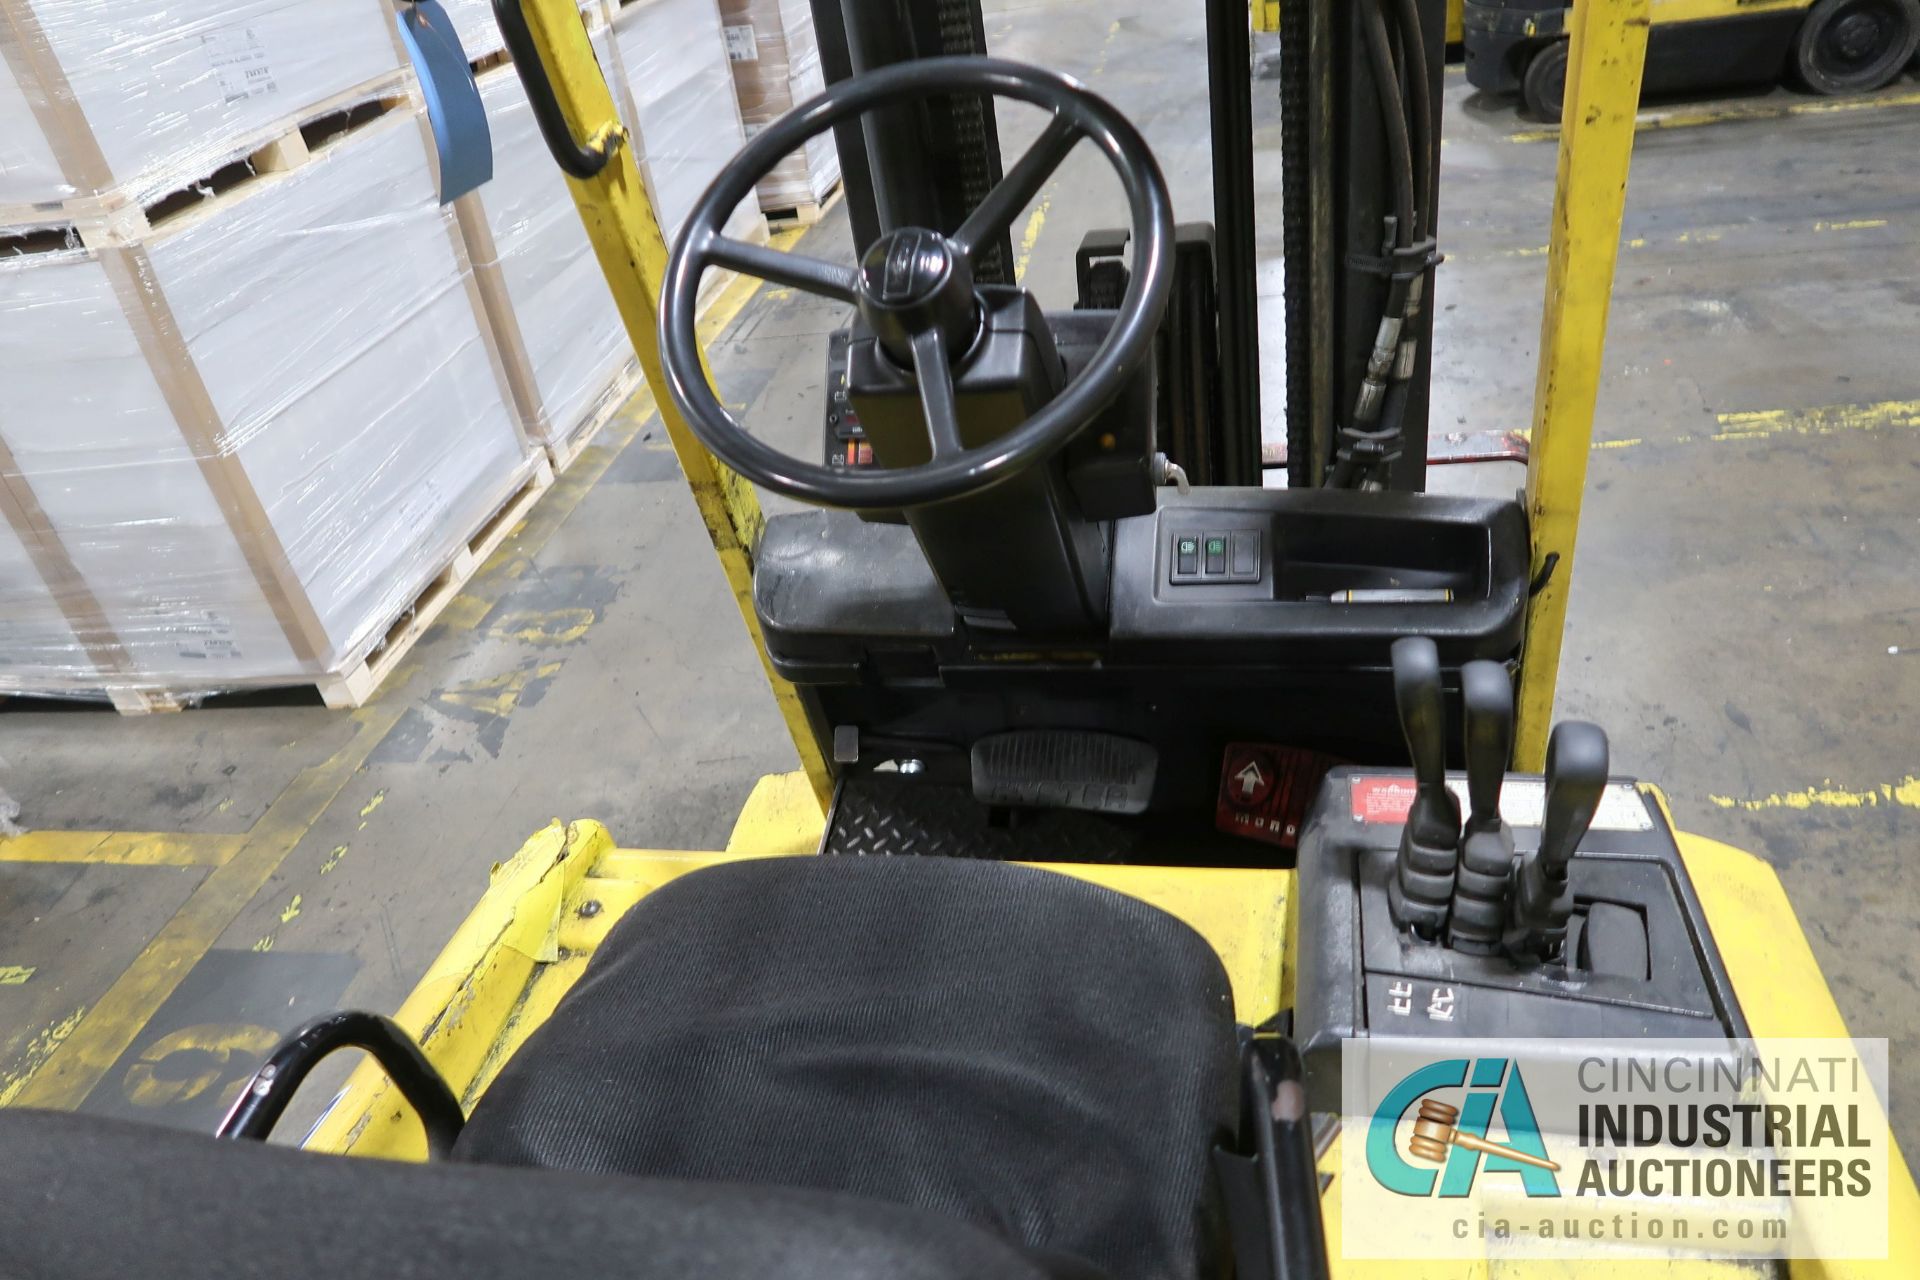 6,500 LB HYSTER MODEL E65XM-40 ELECTRIC SOLID TIRE LIFT TRUCK; S/N F108V023105, 3-STAGE MAST, 88" - Image 6 of 6